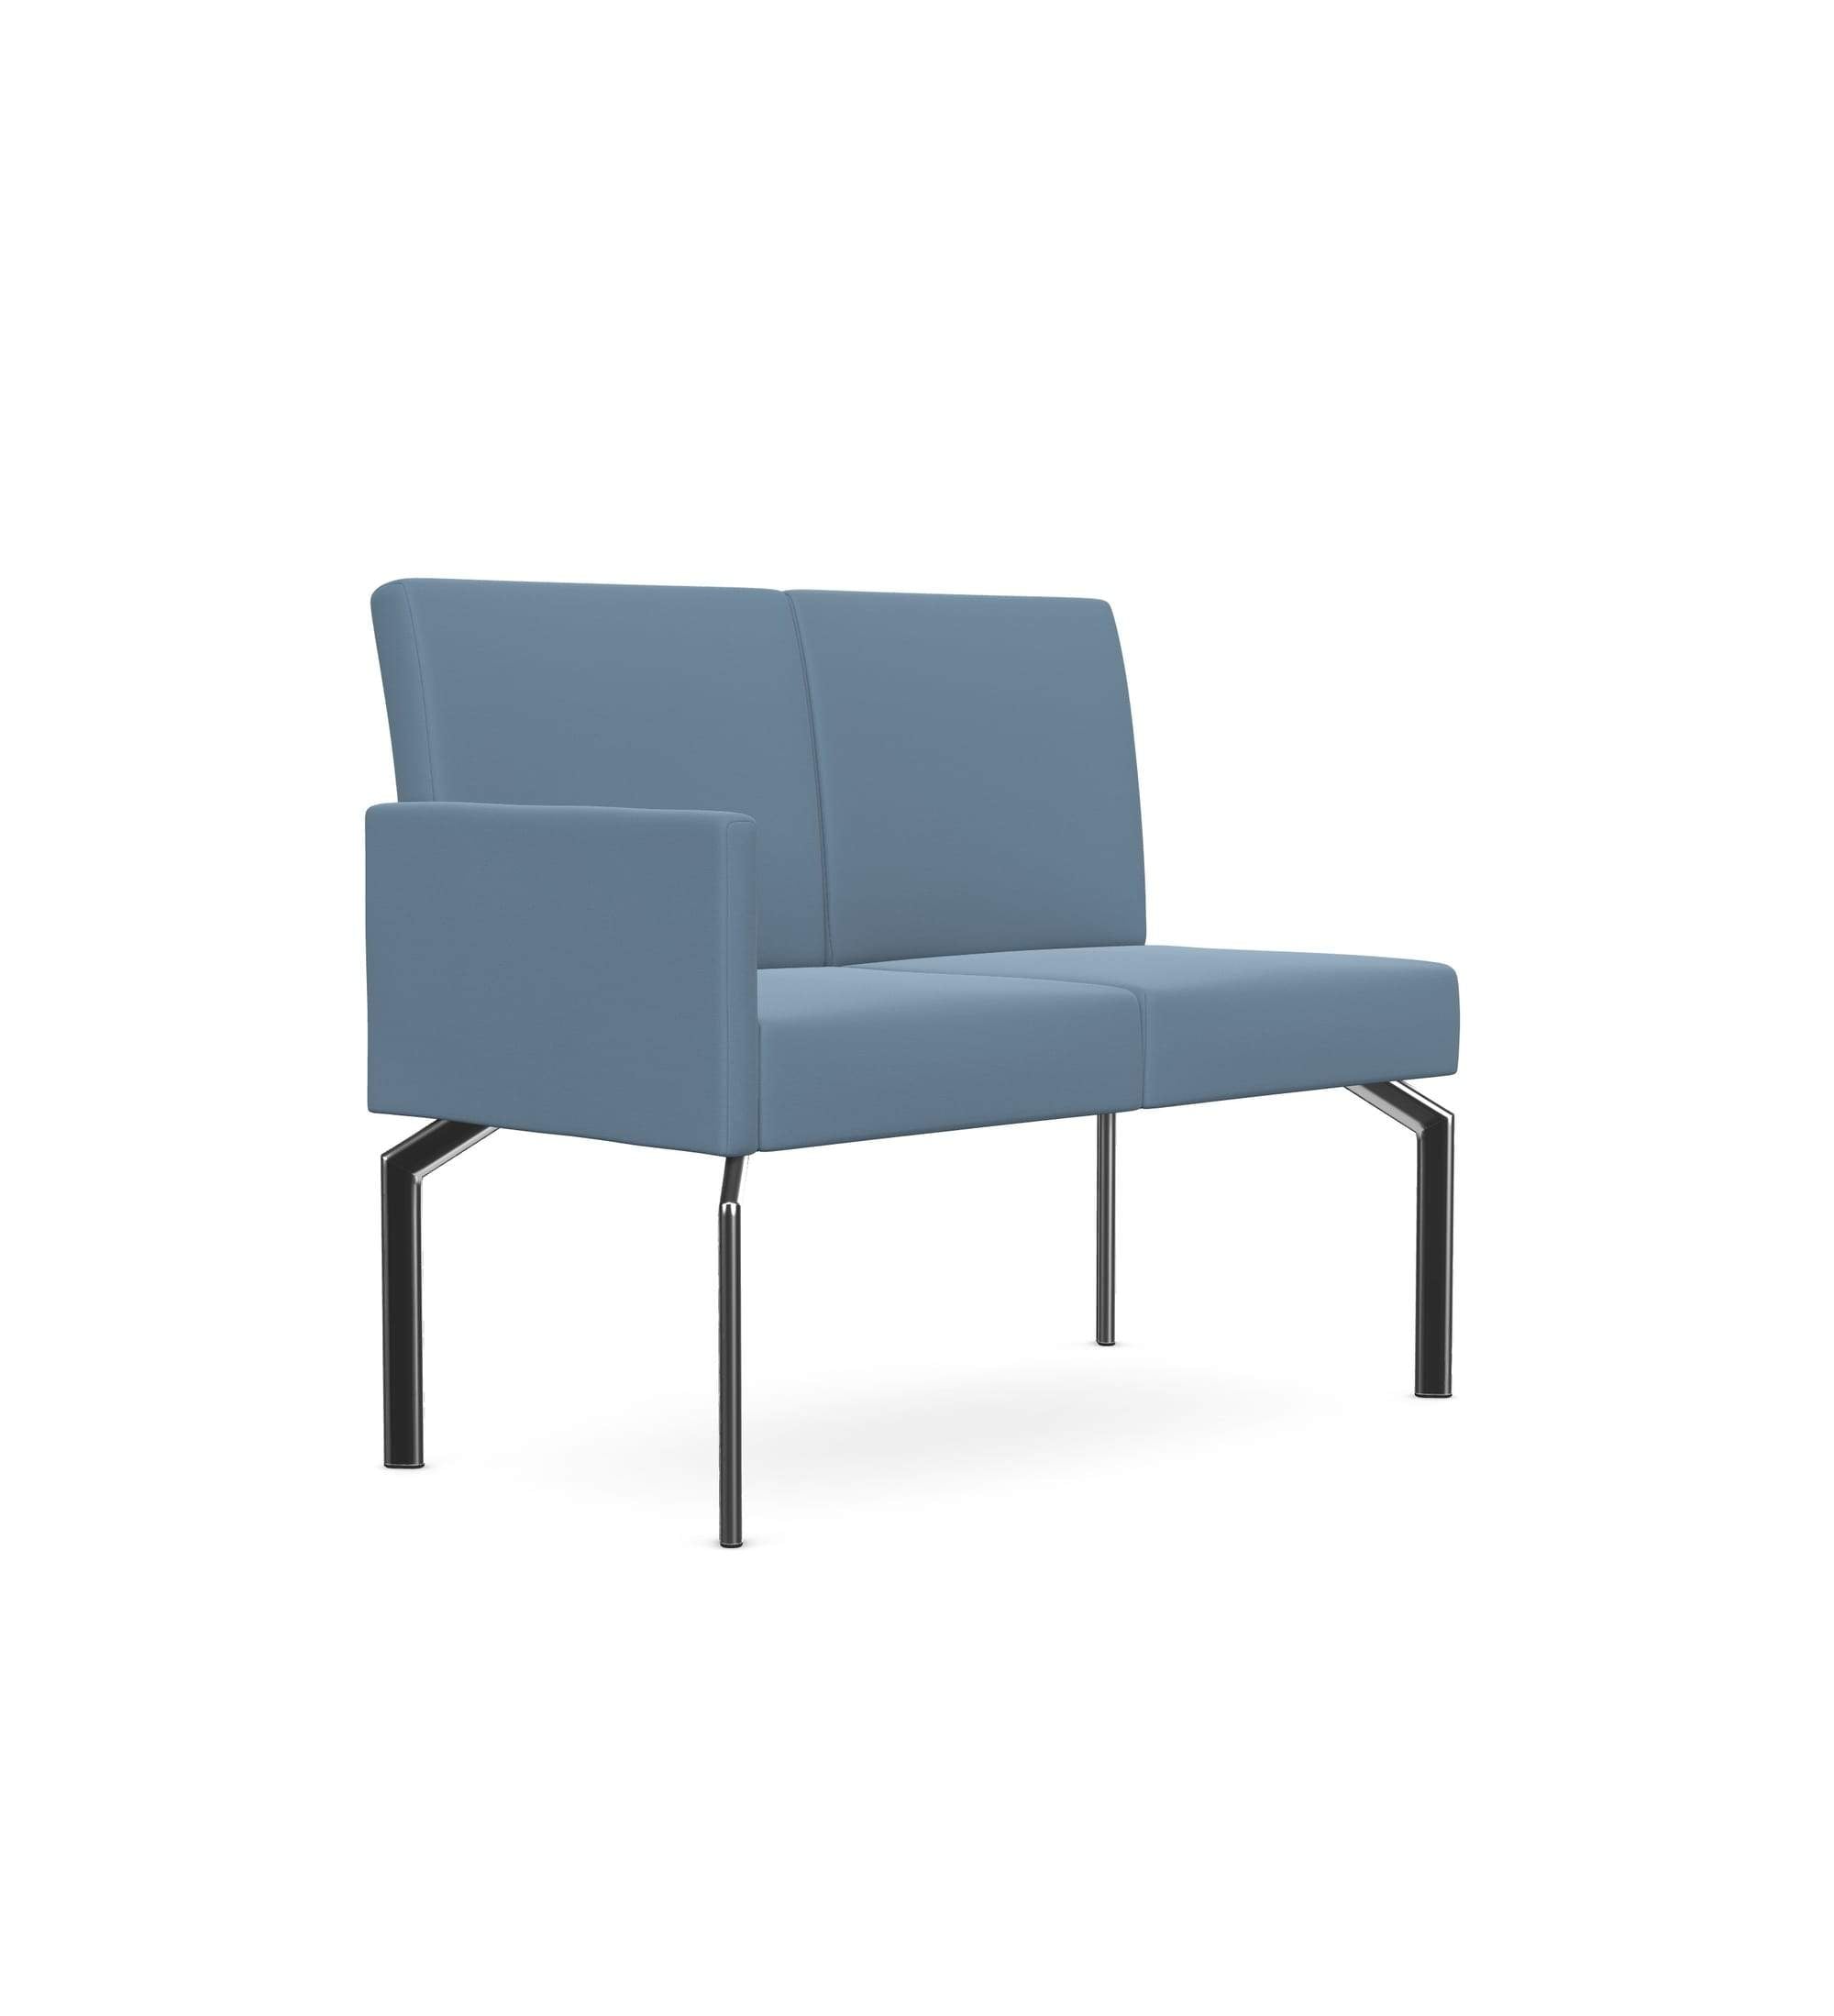 Cloud - 2 Seater with Backrest without Left Armrest